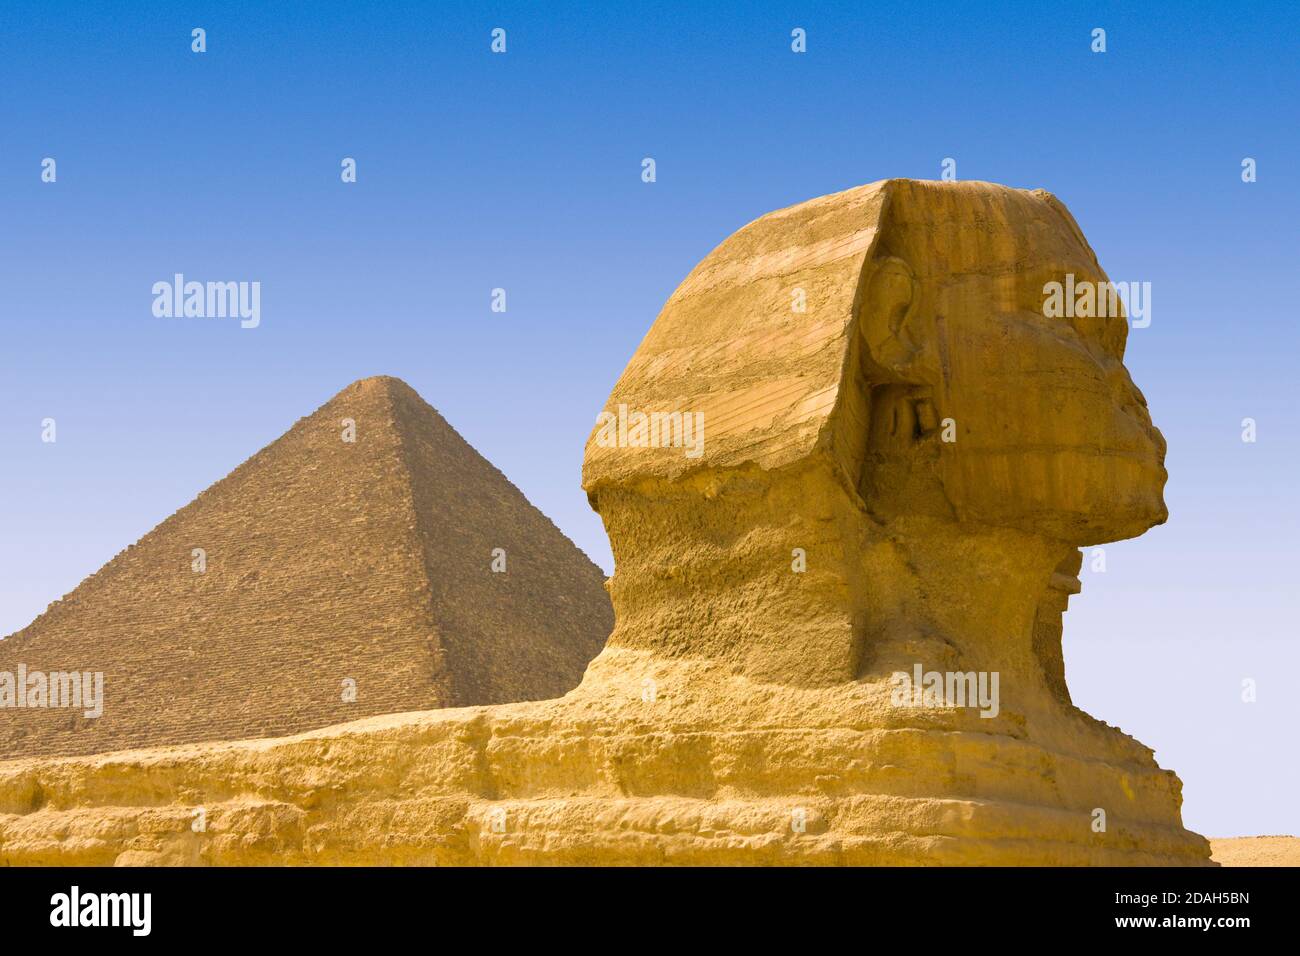 Great Sphinx of Giza and Great Pyramid of Giza, UNESCO World Heritage site, Giza, Cairo Governorate, Egypt Stock Photo